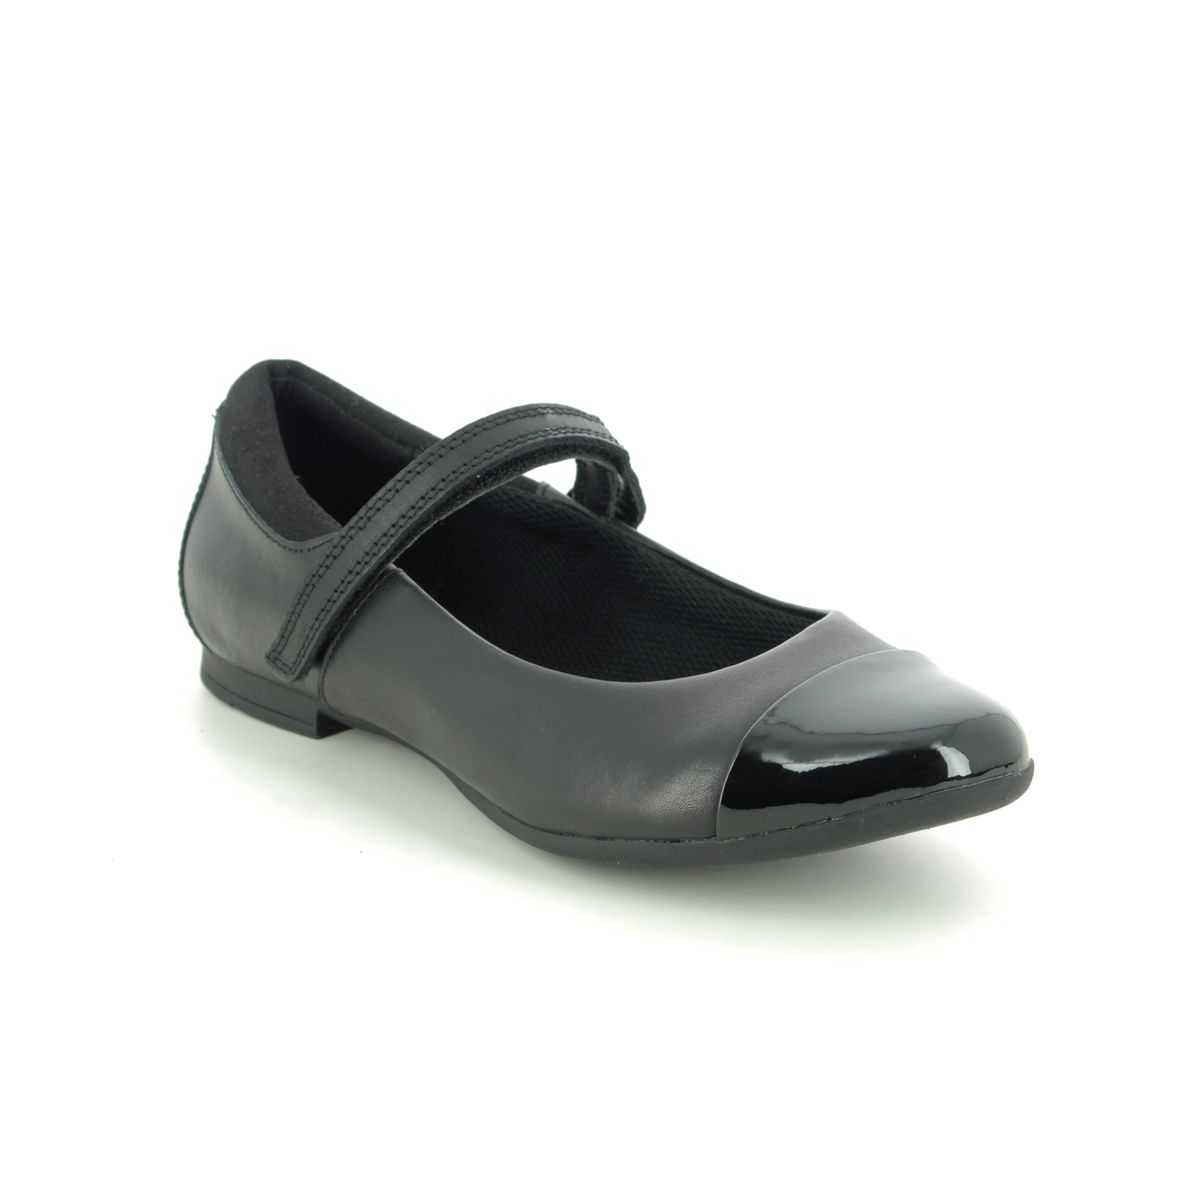 Clarks Scala Gem Y Black Leather Kids Girls School Shoes 495575E In Size 6 In Plain Black Leather E Width Fitting Narrow Fit For School For kids